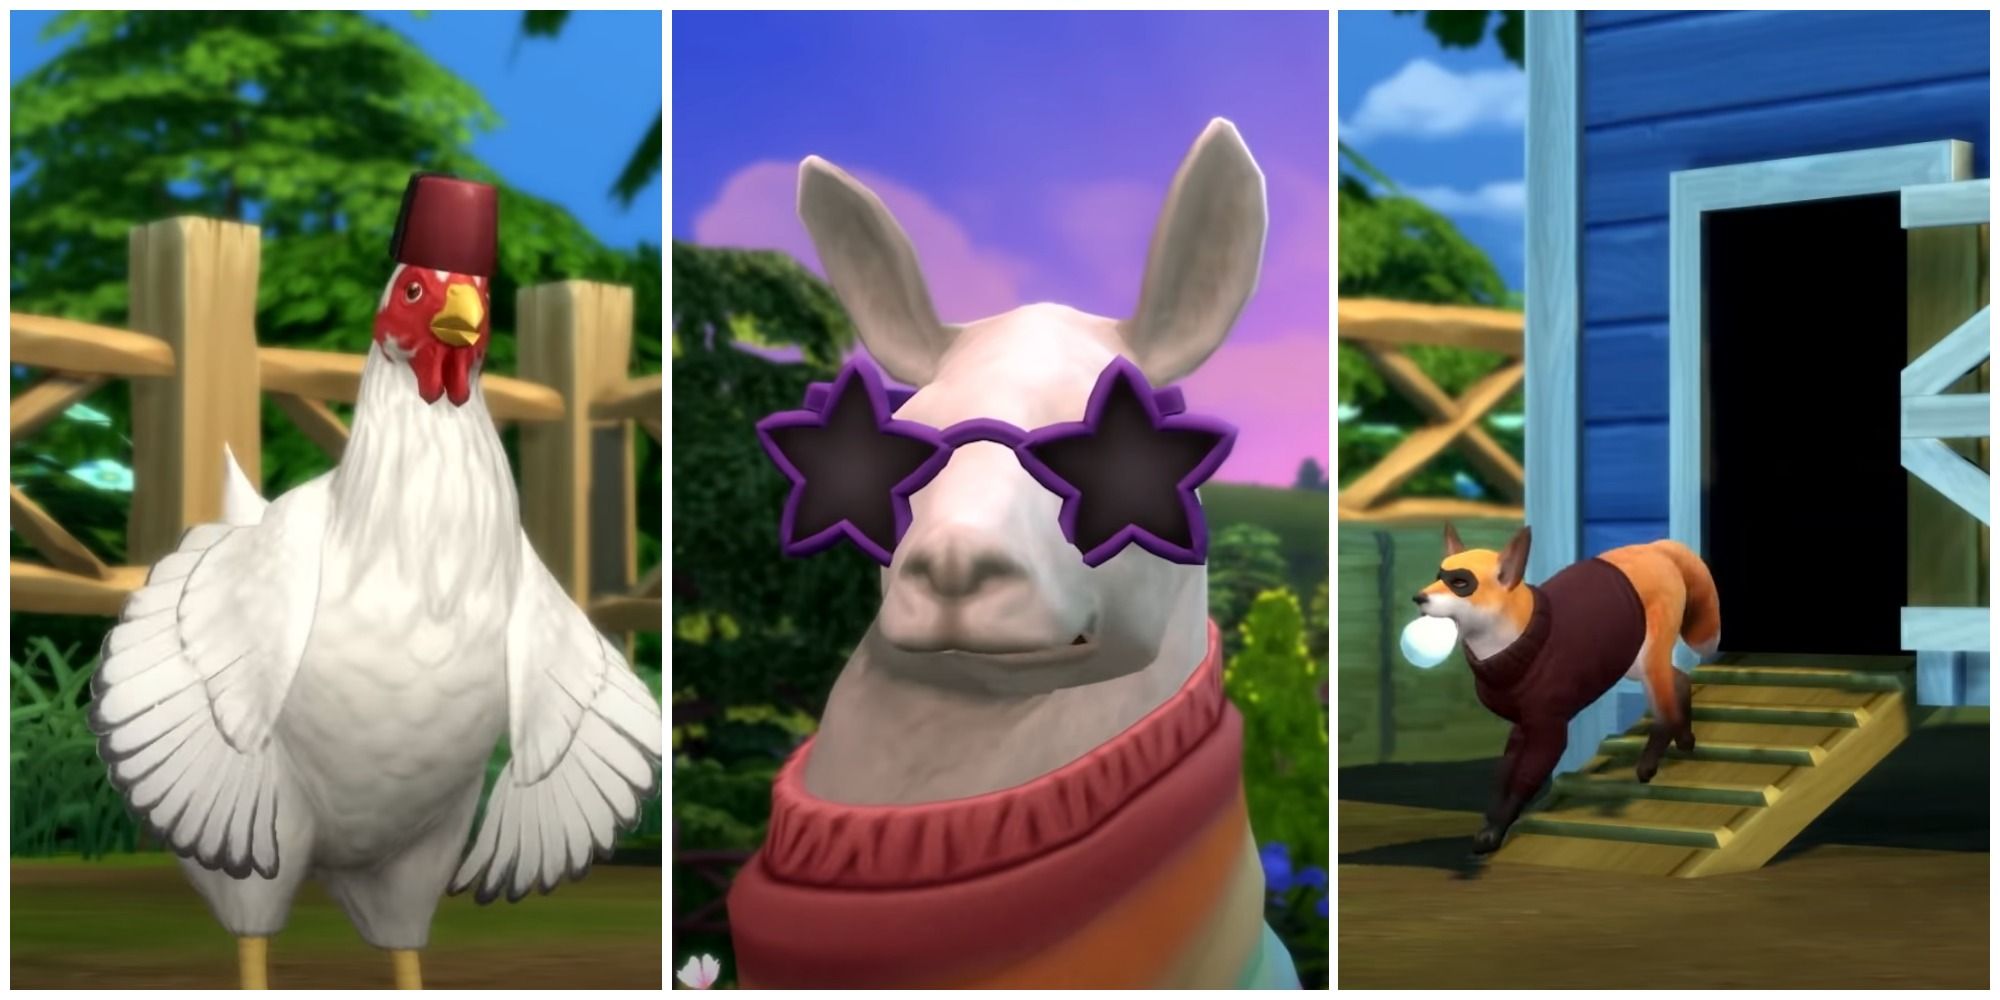 Sims 4: Cottage Living - All Animals Ranked